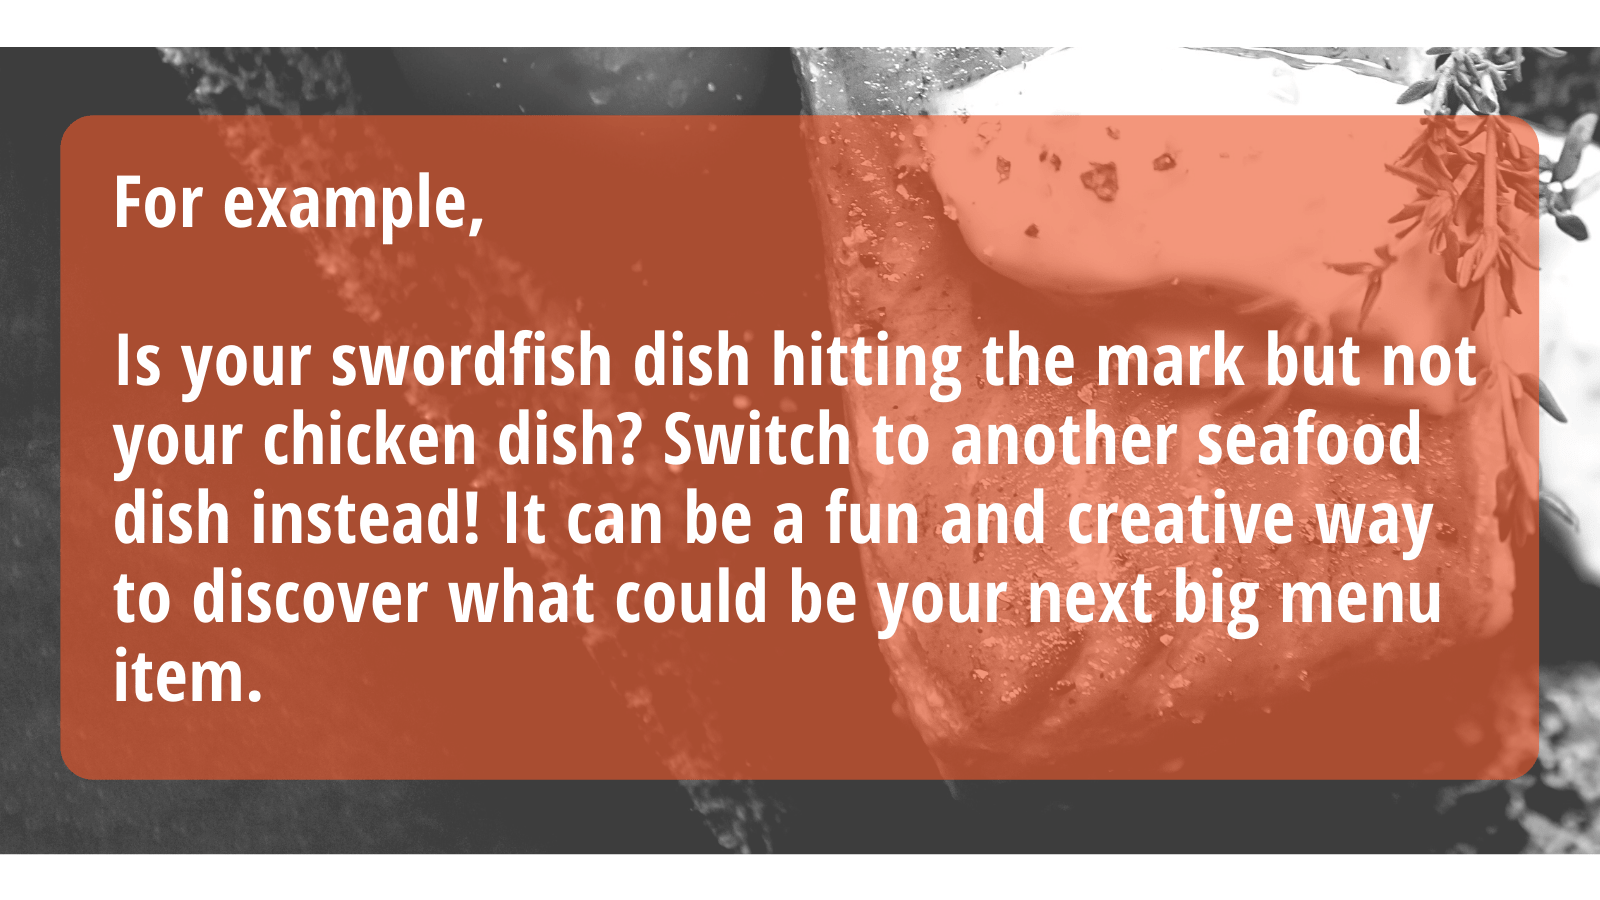 replace menu item with another dish hybrid pos